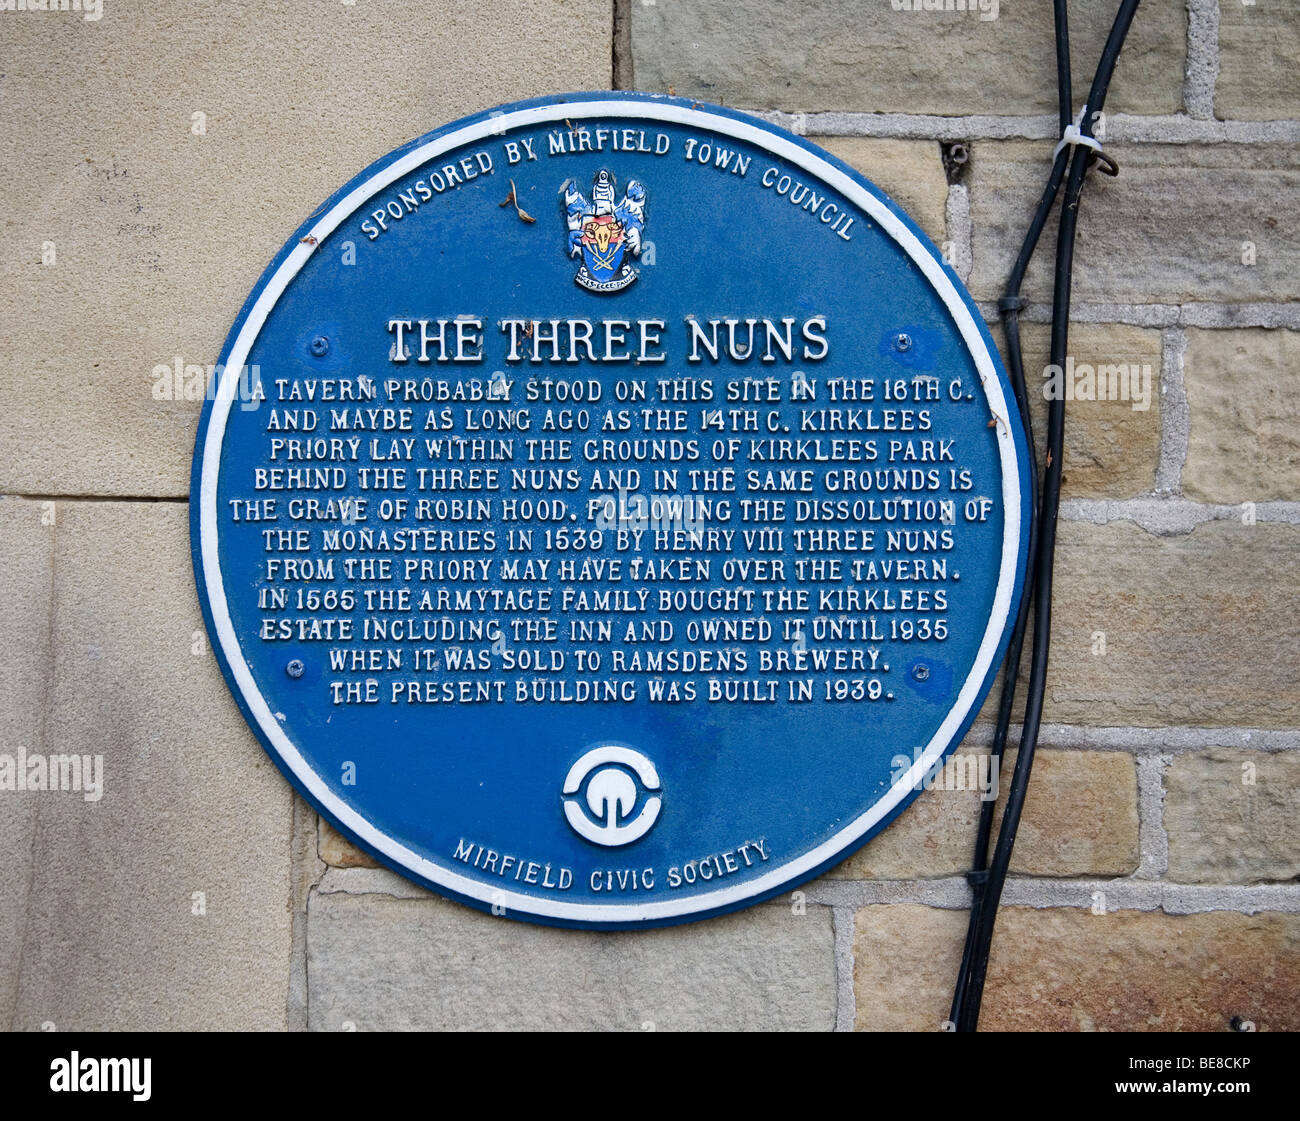 Blue information plaque outside the Three Nuns Inn at Cooper Bridge, Mirfield, West Yorkshire UK Stock Photo